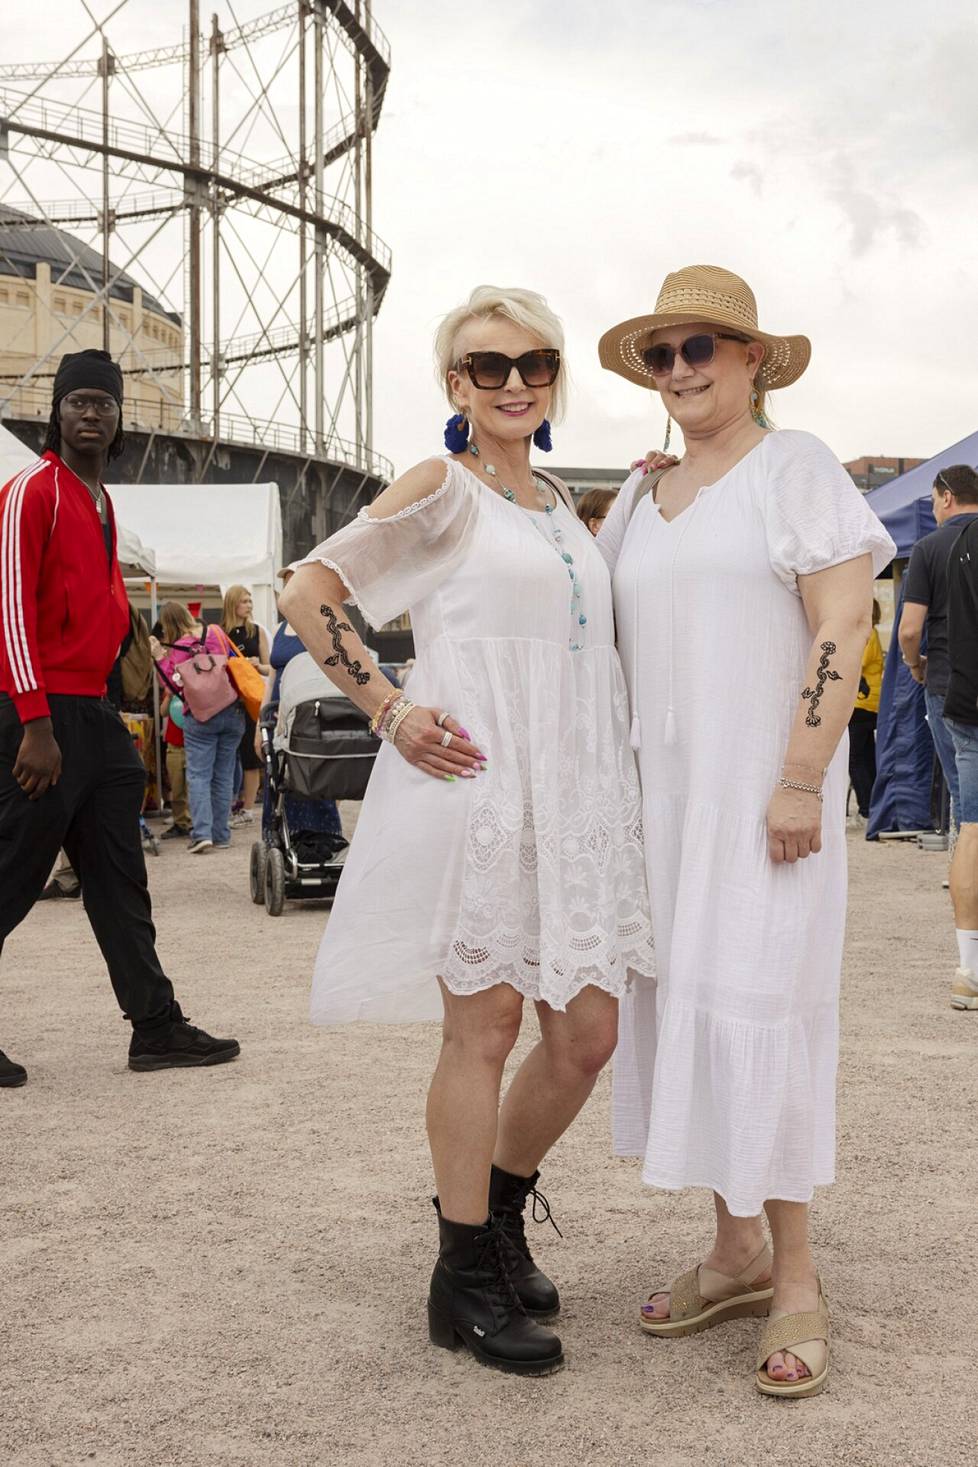 Päivi Anttila (left) and Marjo Faye from Espoo wore white, even though they didn't agree on it in advance.